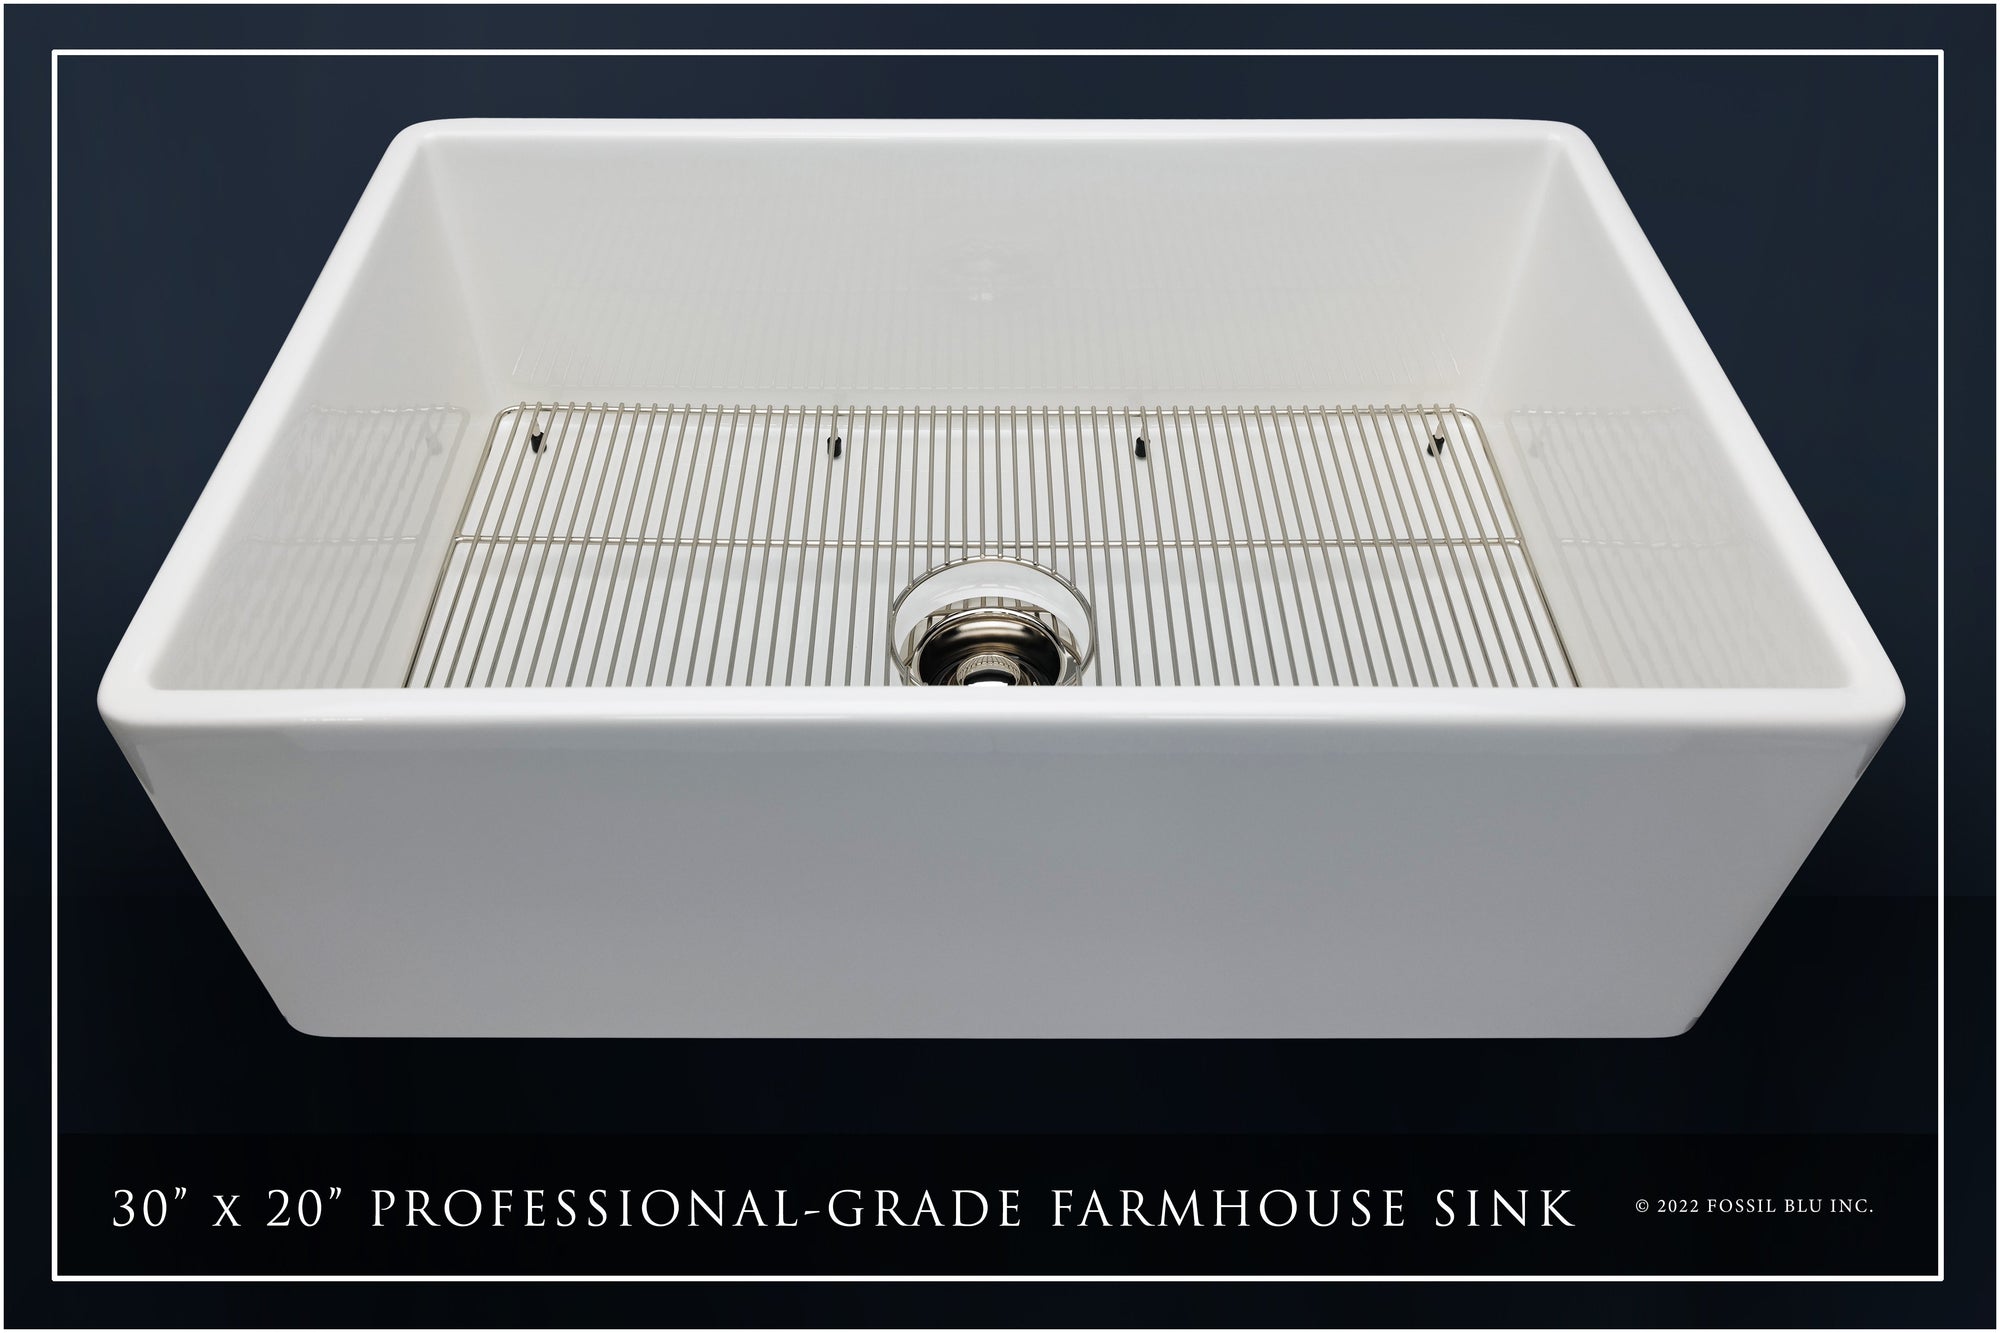 FSW1001PN LUXURY 30-INCH SOLID FIRECLAY FARMHOUSE SINK IN WHITE, POLISHED NICKEL ACCS, FLAT FRONT